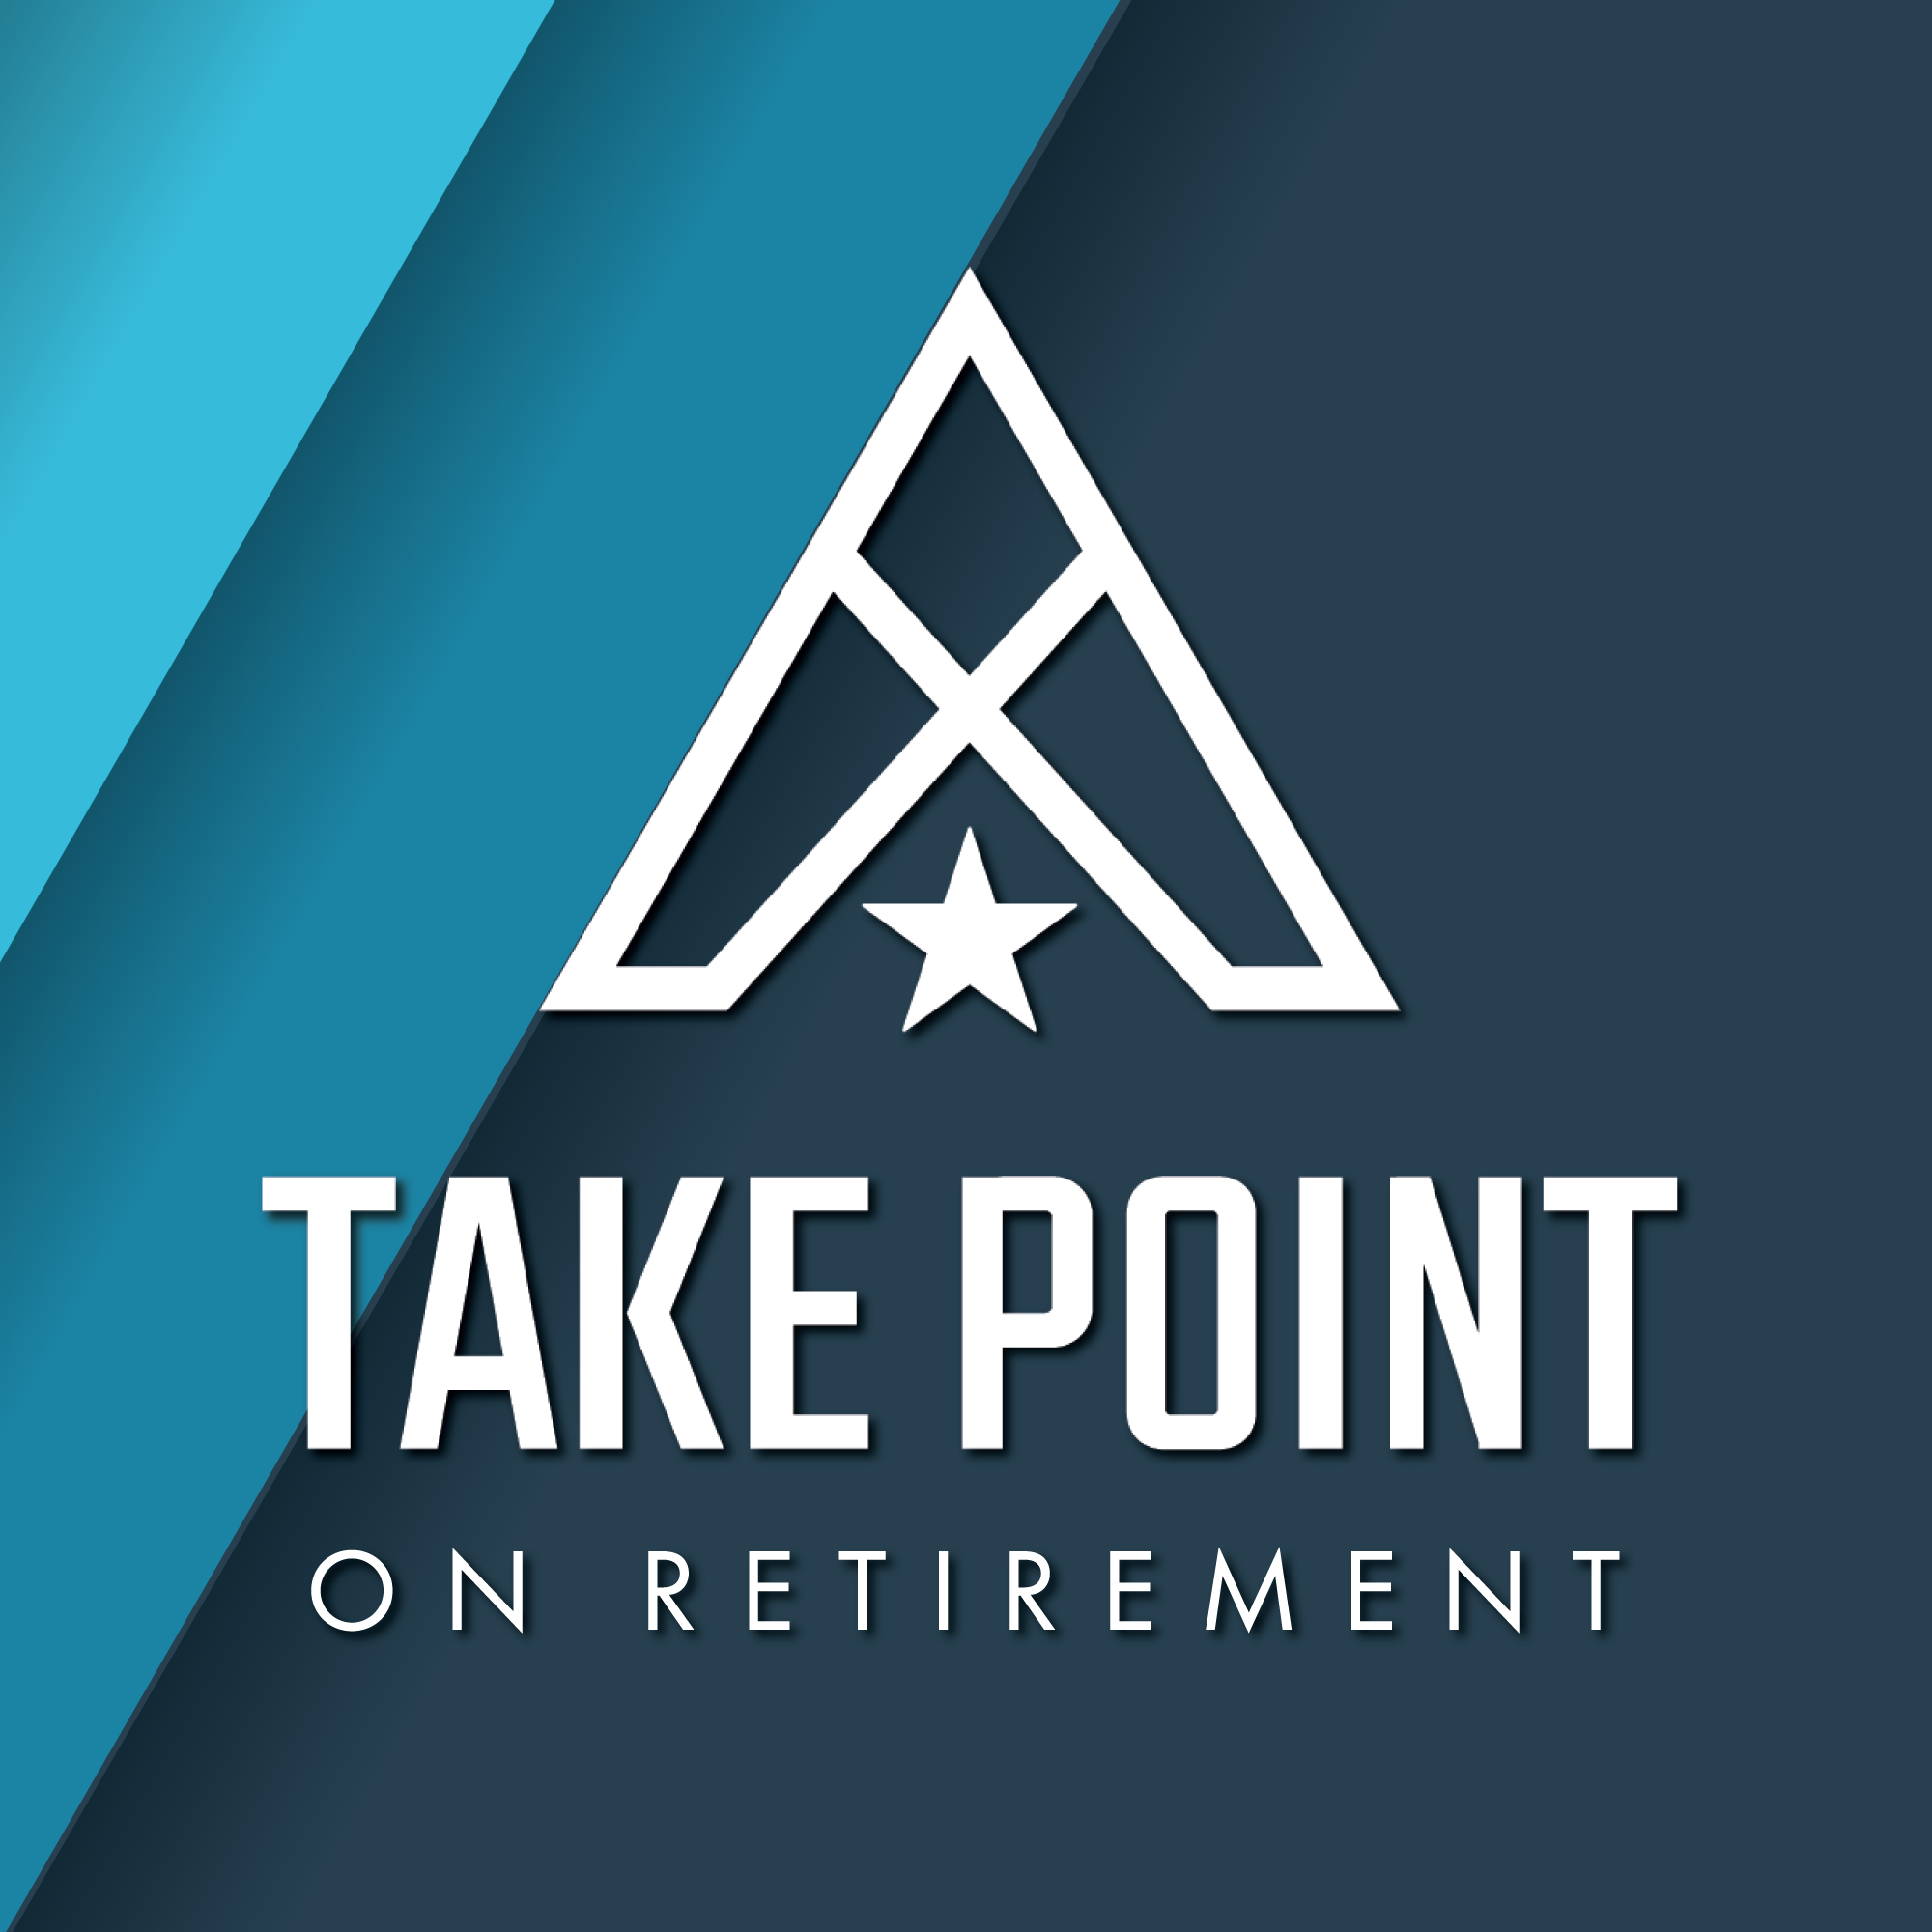 Take Point on Retirement